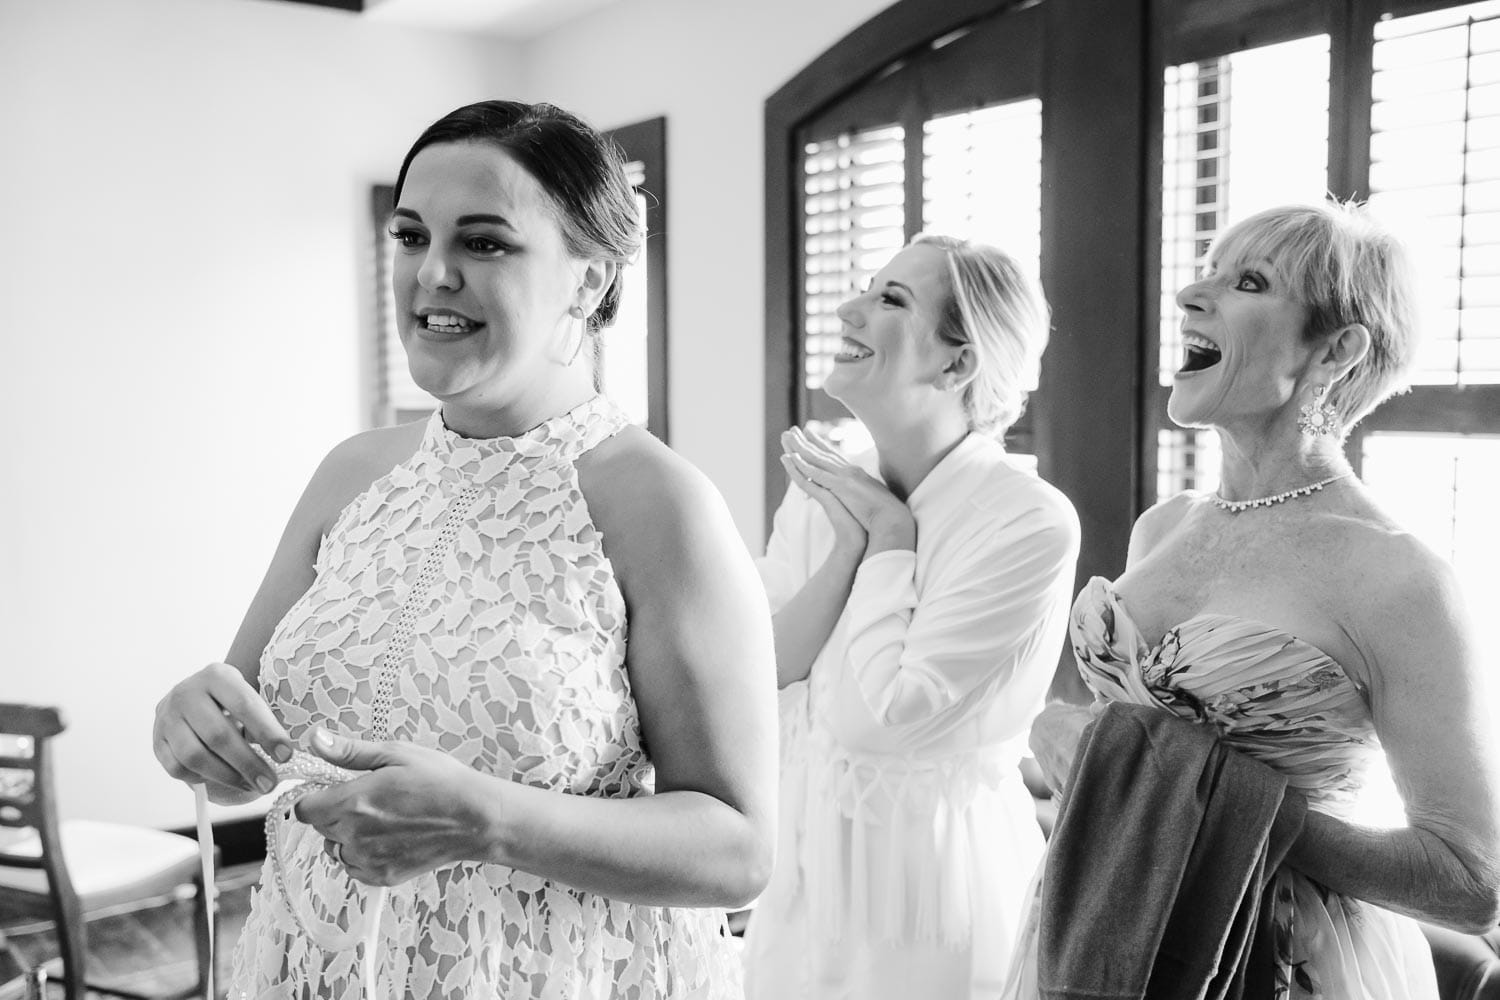 The mother of the bride sister and mother react to flower girls dressed